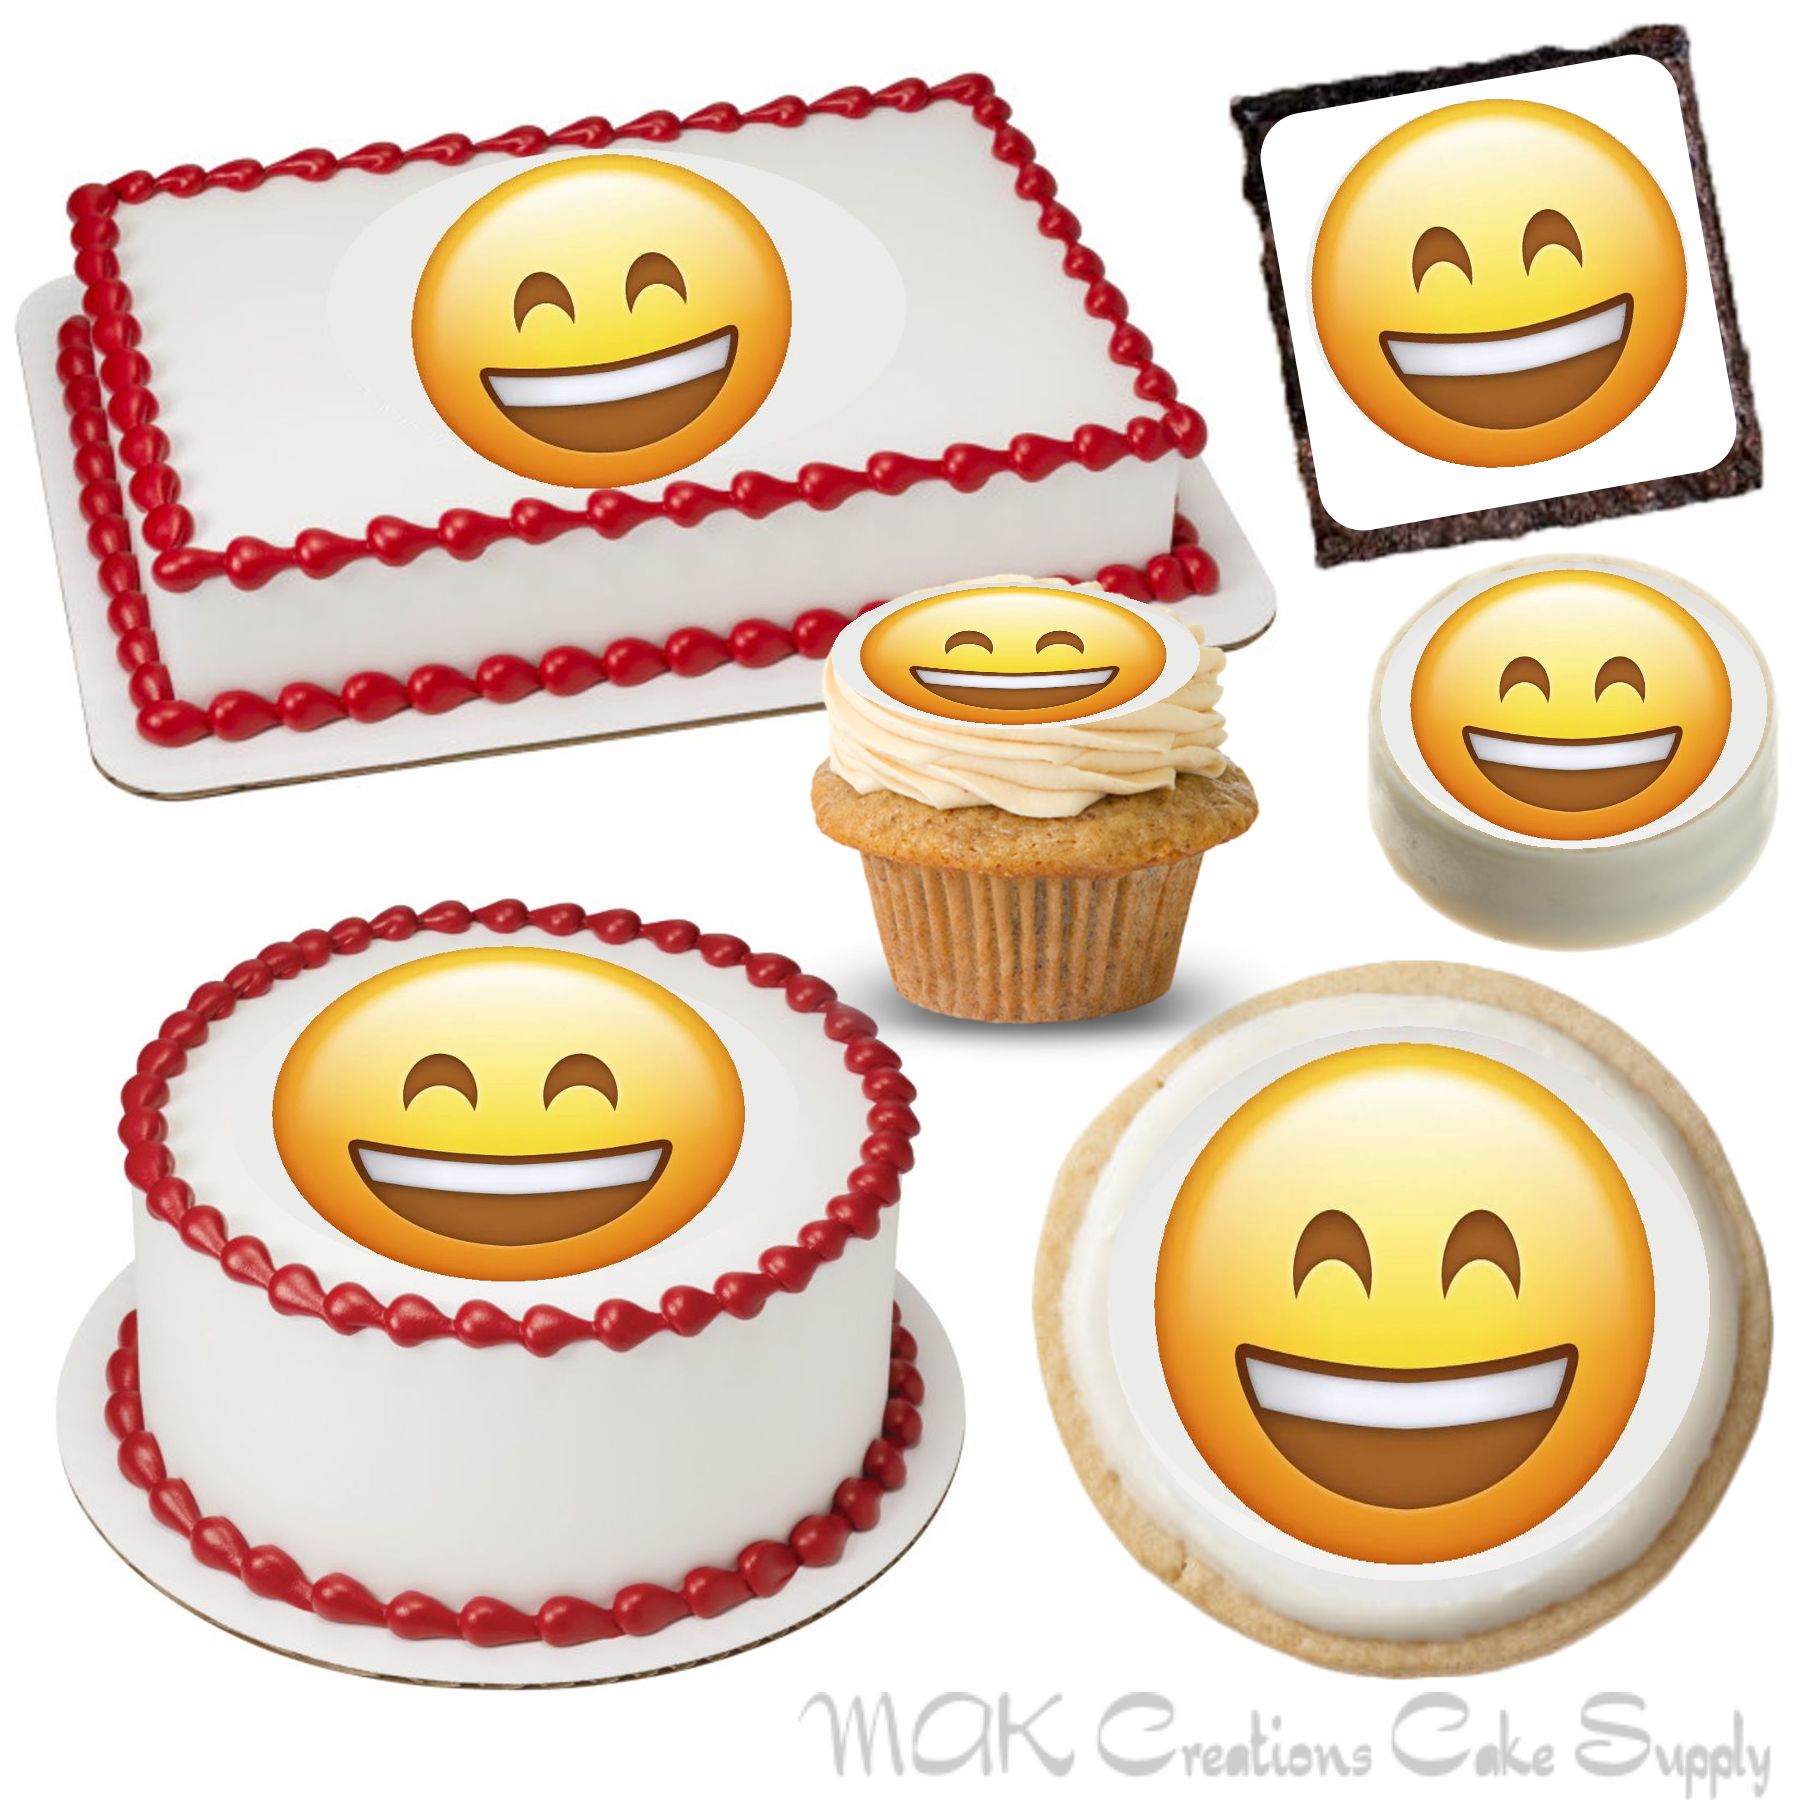 🎂 Birthday Cake Emoji Meaning with Pictures: from A to Z-nttc.com.vn